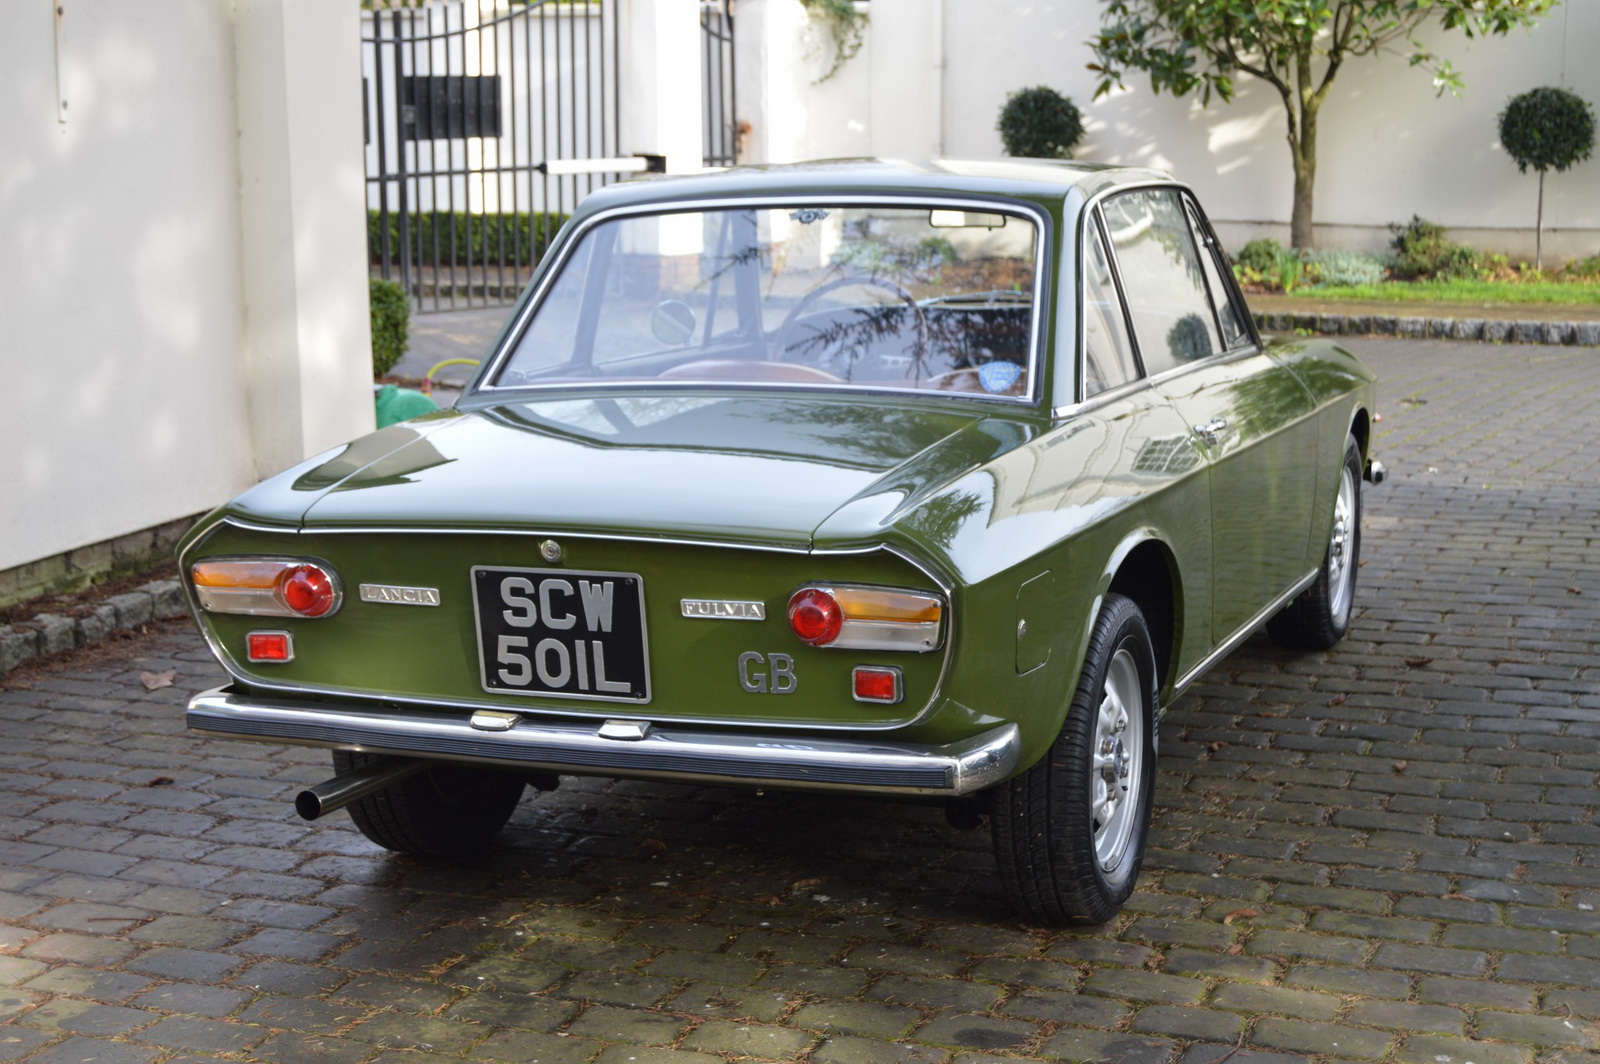 Mamma Mia, A Perfect Green Lancia Fulvia Is Now Offered In Auction